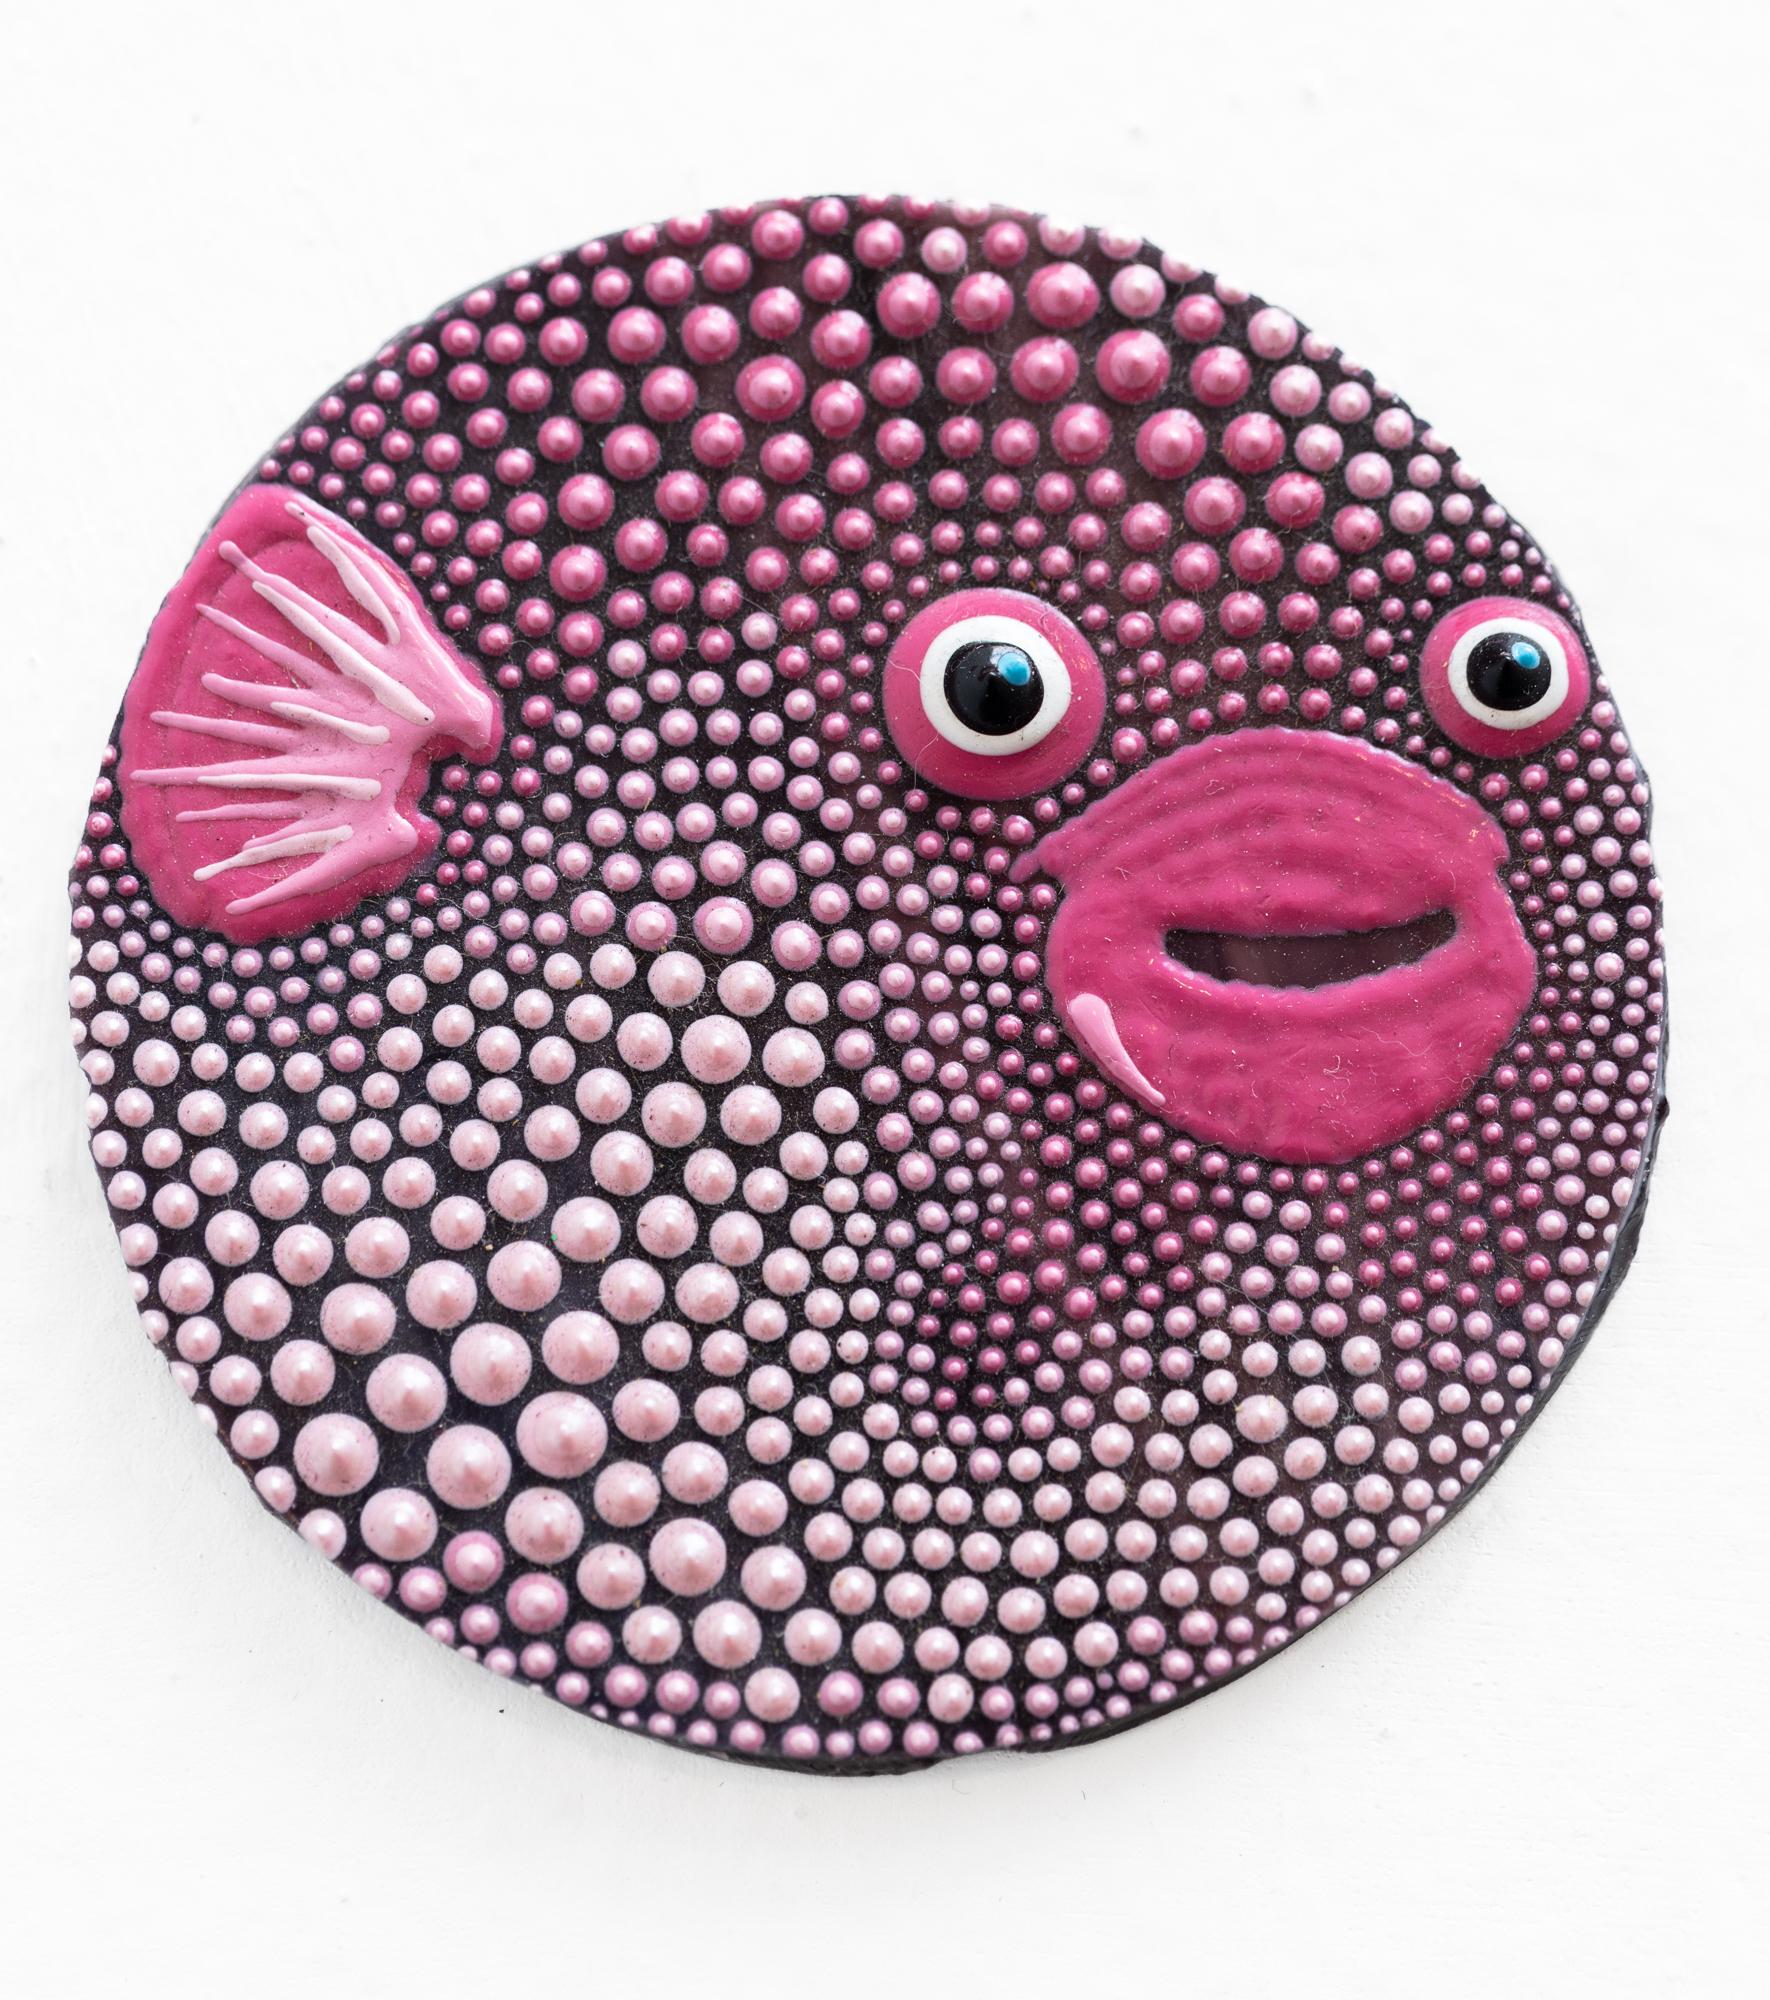 PJ Linden Animal Painting - "Lucky Fugu" Fish-inspired miniature, dimensional paint on mosaic glass tile